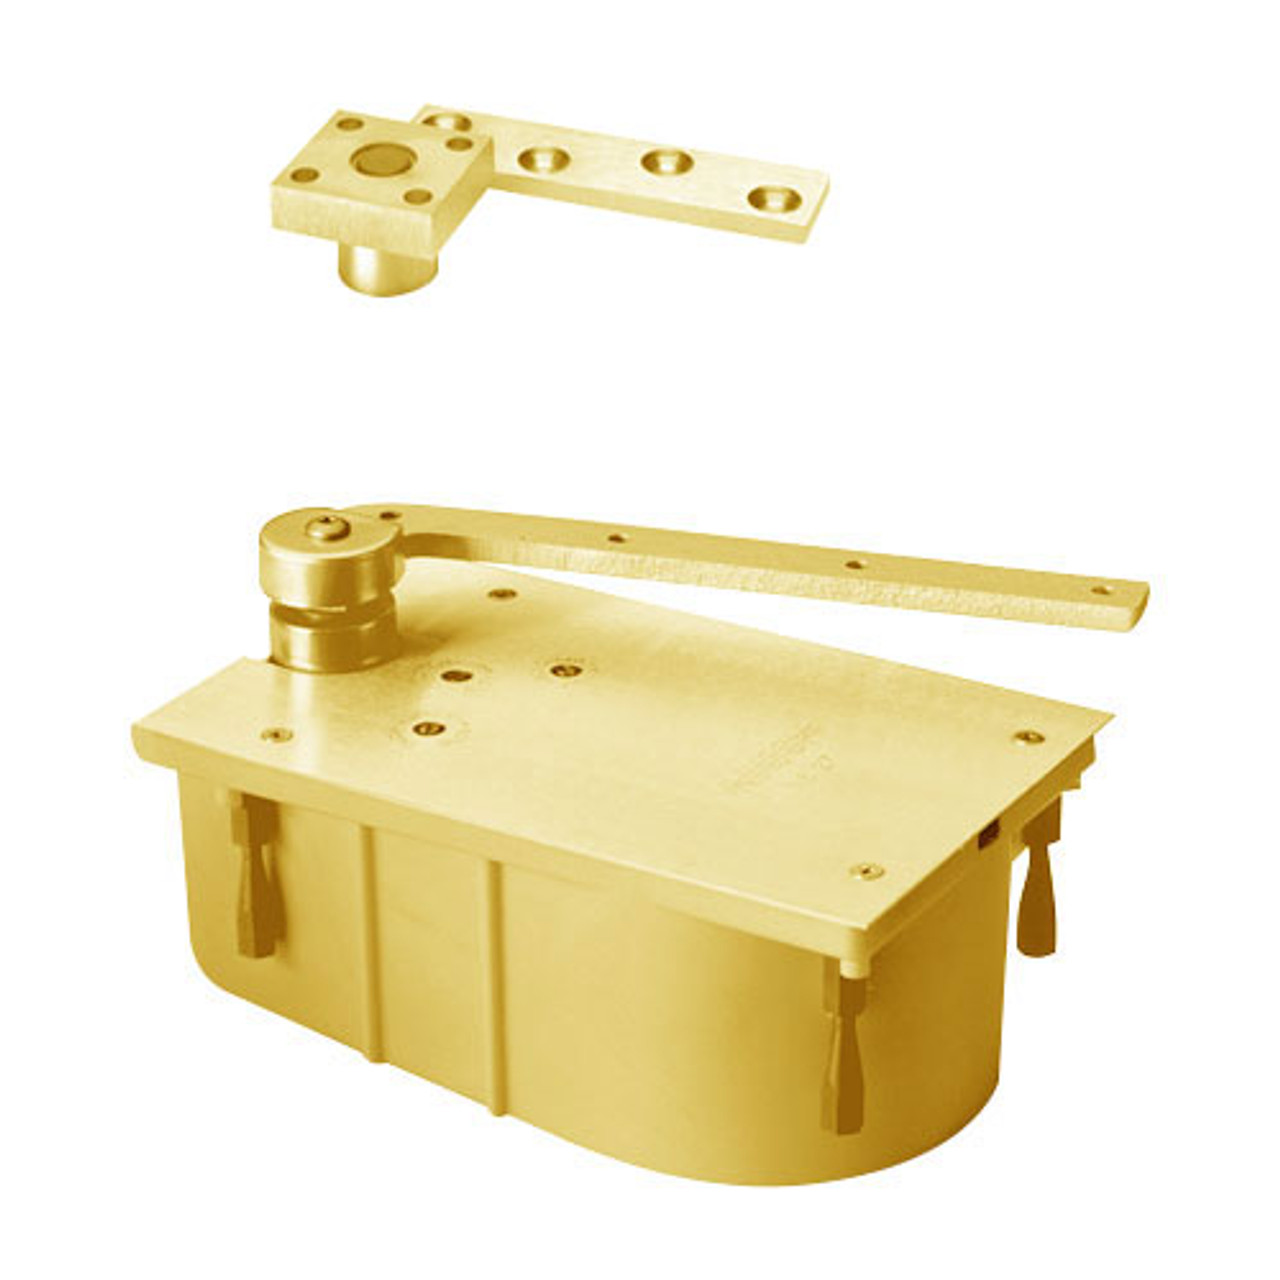 427-85N-LH-605 Rixson 427 Series Heavy Duty 3/4" Offset Hung Floor Closer in Bright Brass